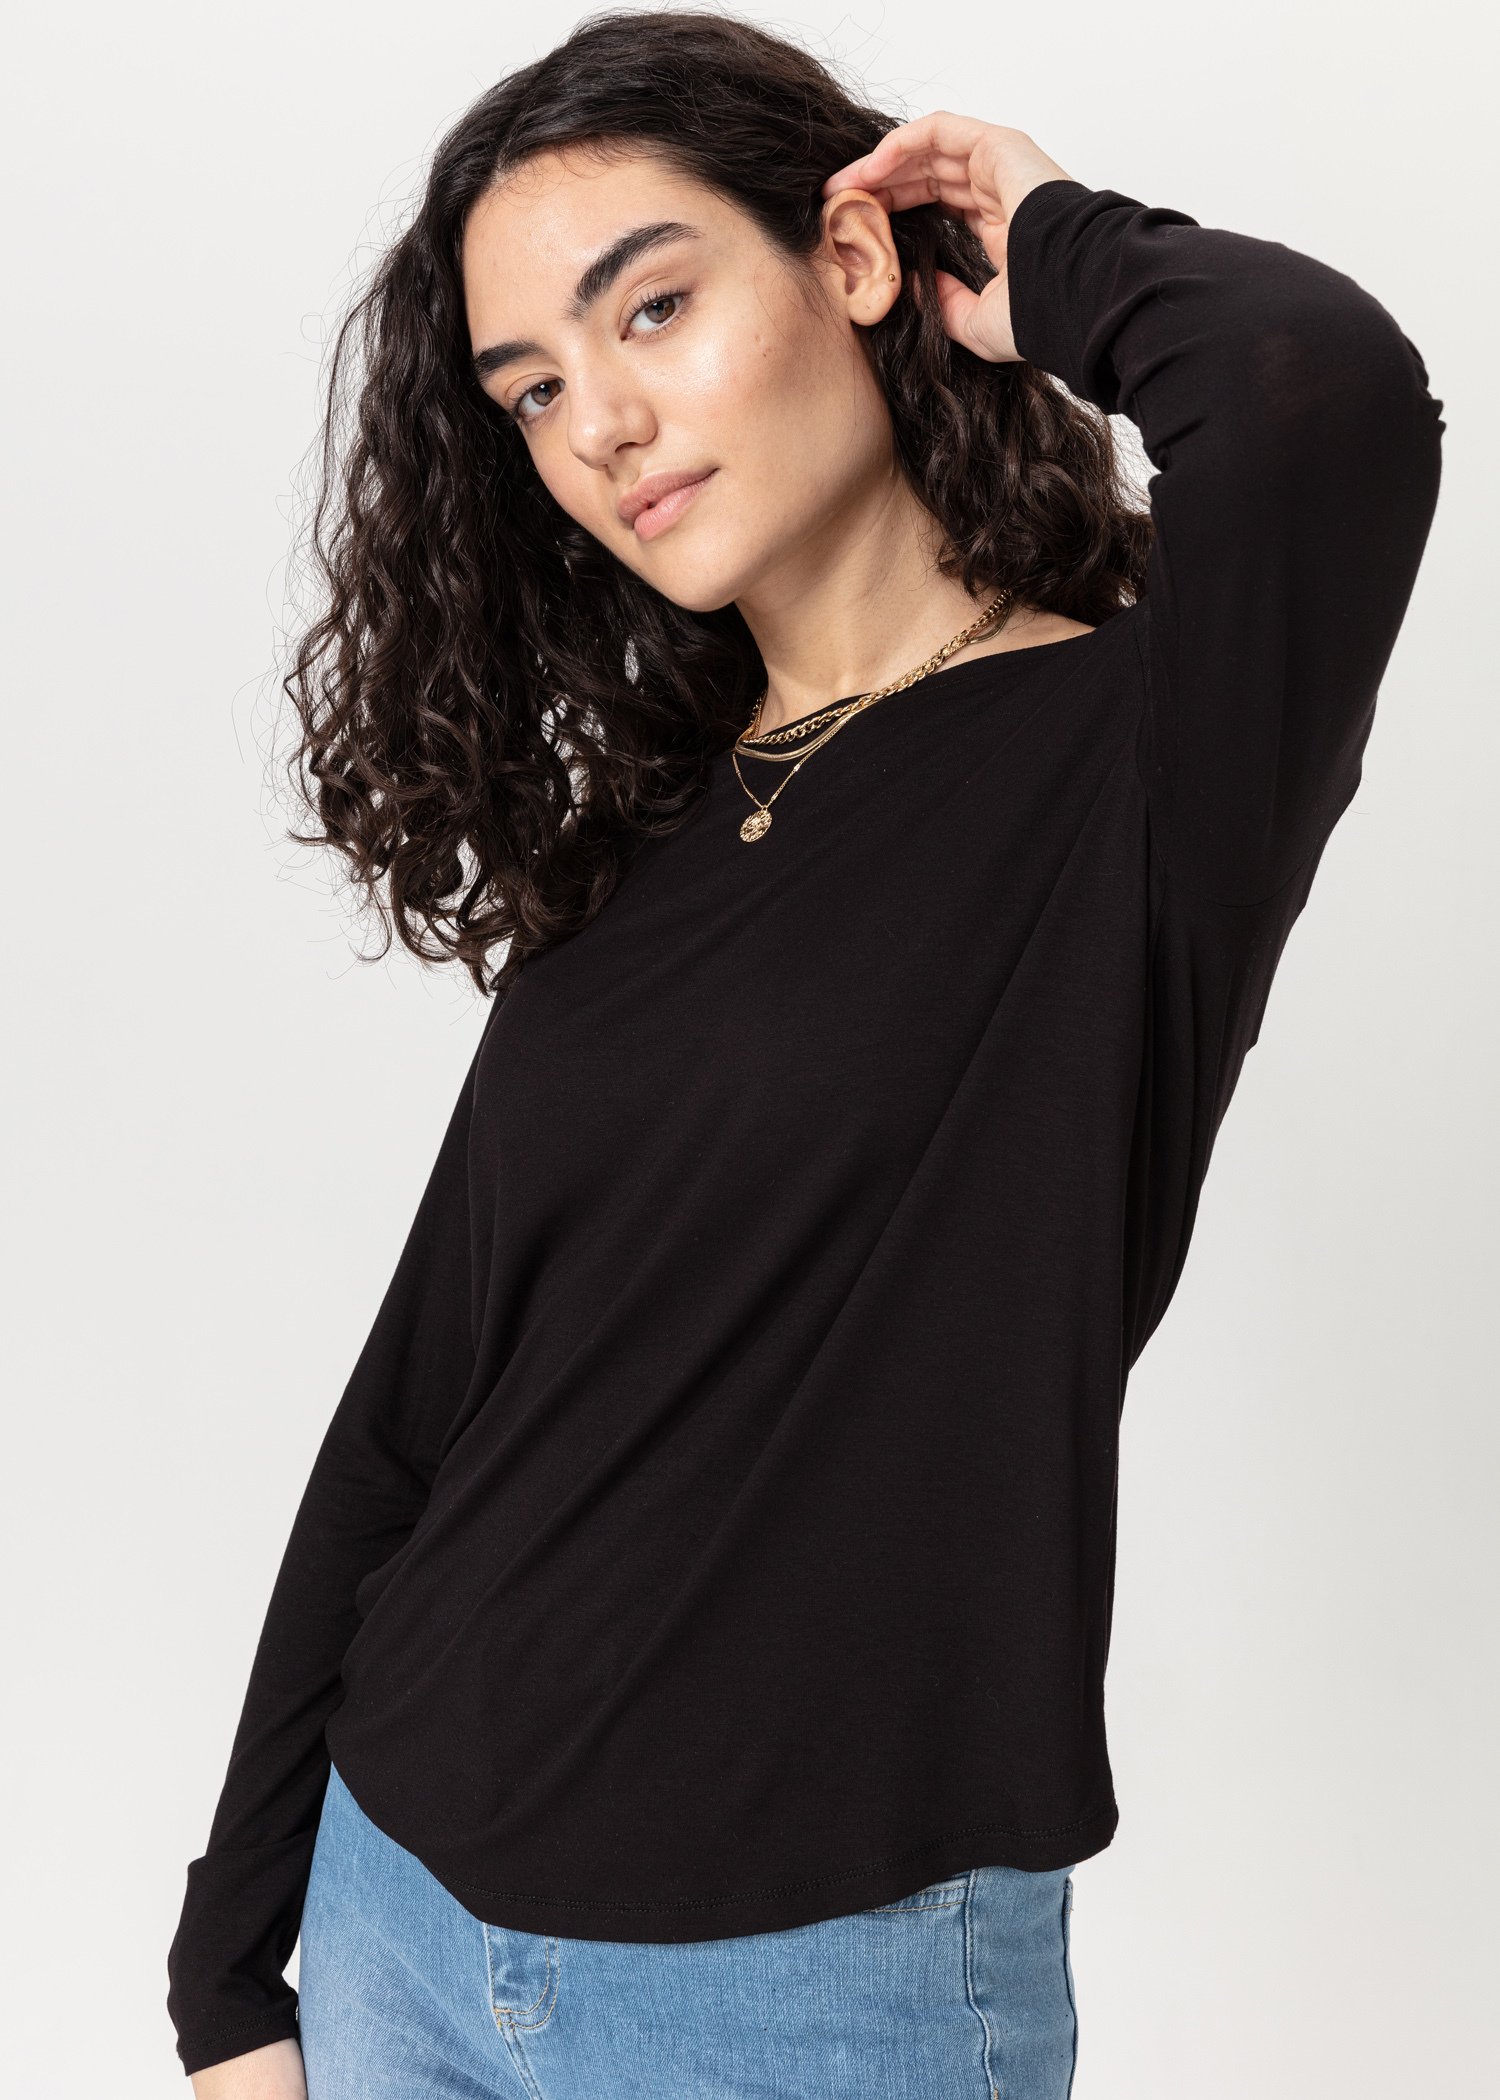 Solid long sleeved top